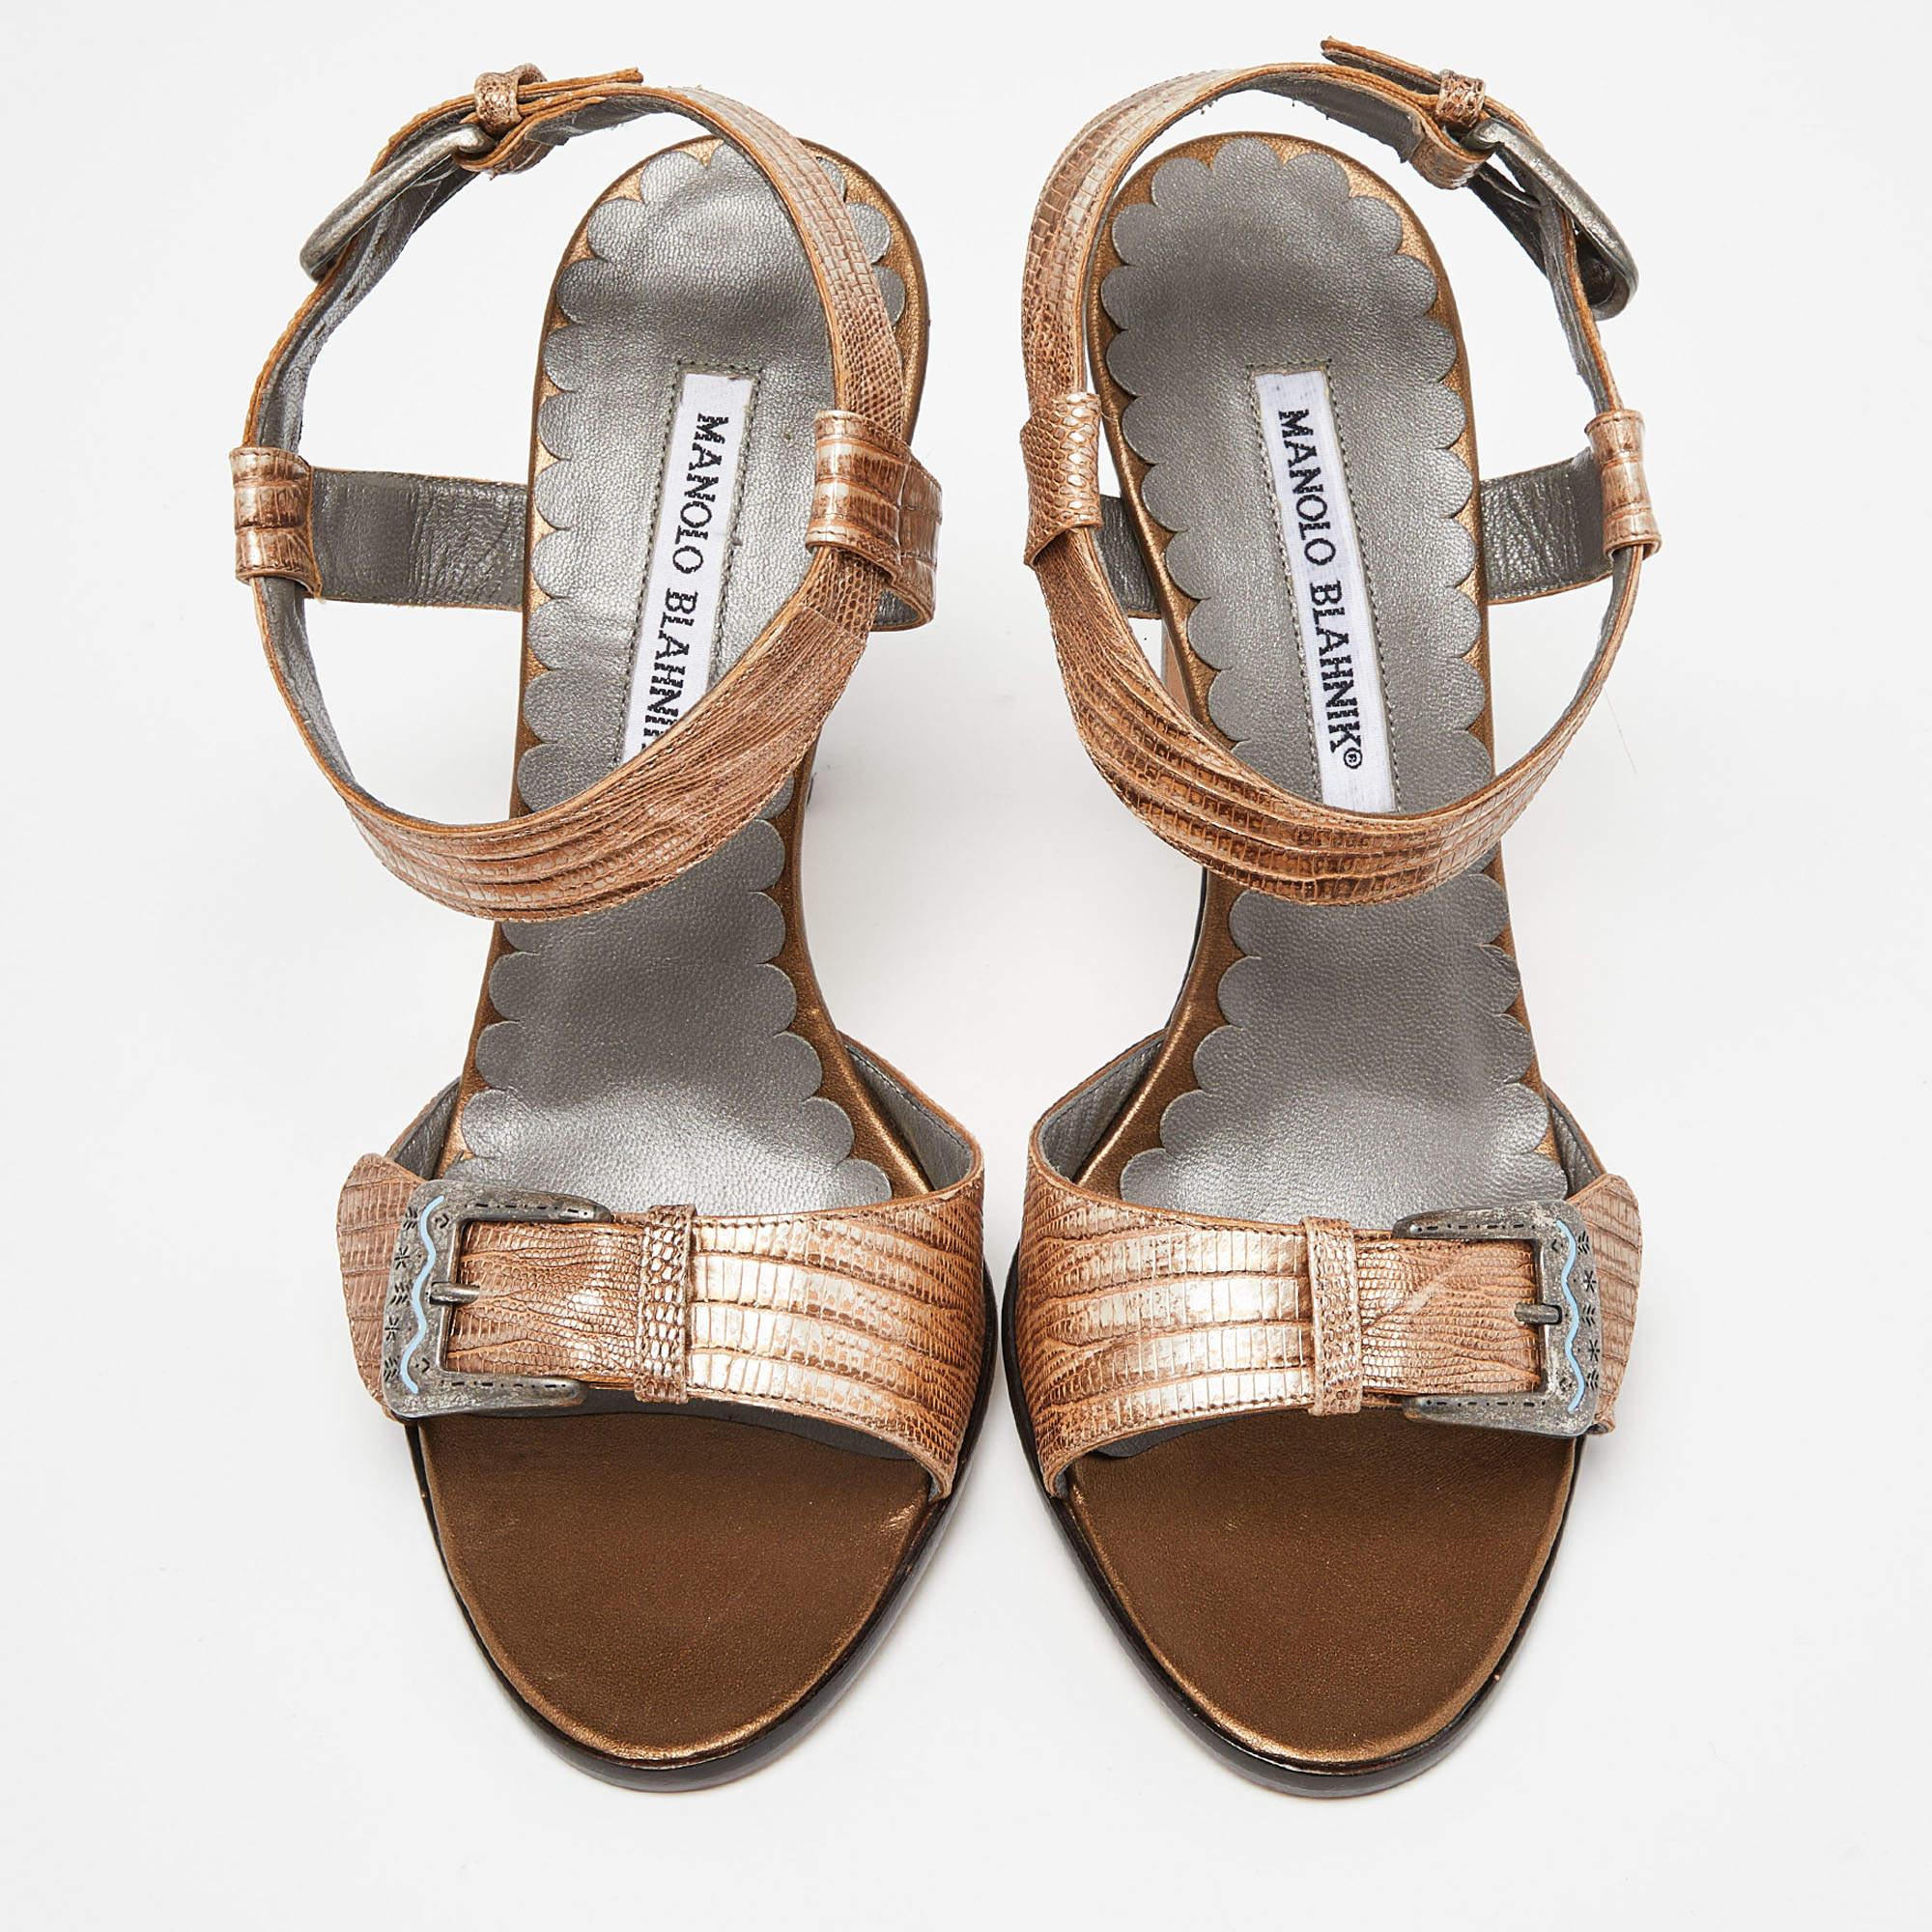 Introducing these stylish heeled sandals—the perfect addition to your footwear collection. With a comfortable yet elegant design, these sandals feature sturdy heels and supportive straps, making them ideal to wear for long hours. Step out in